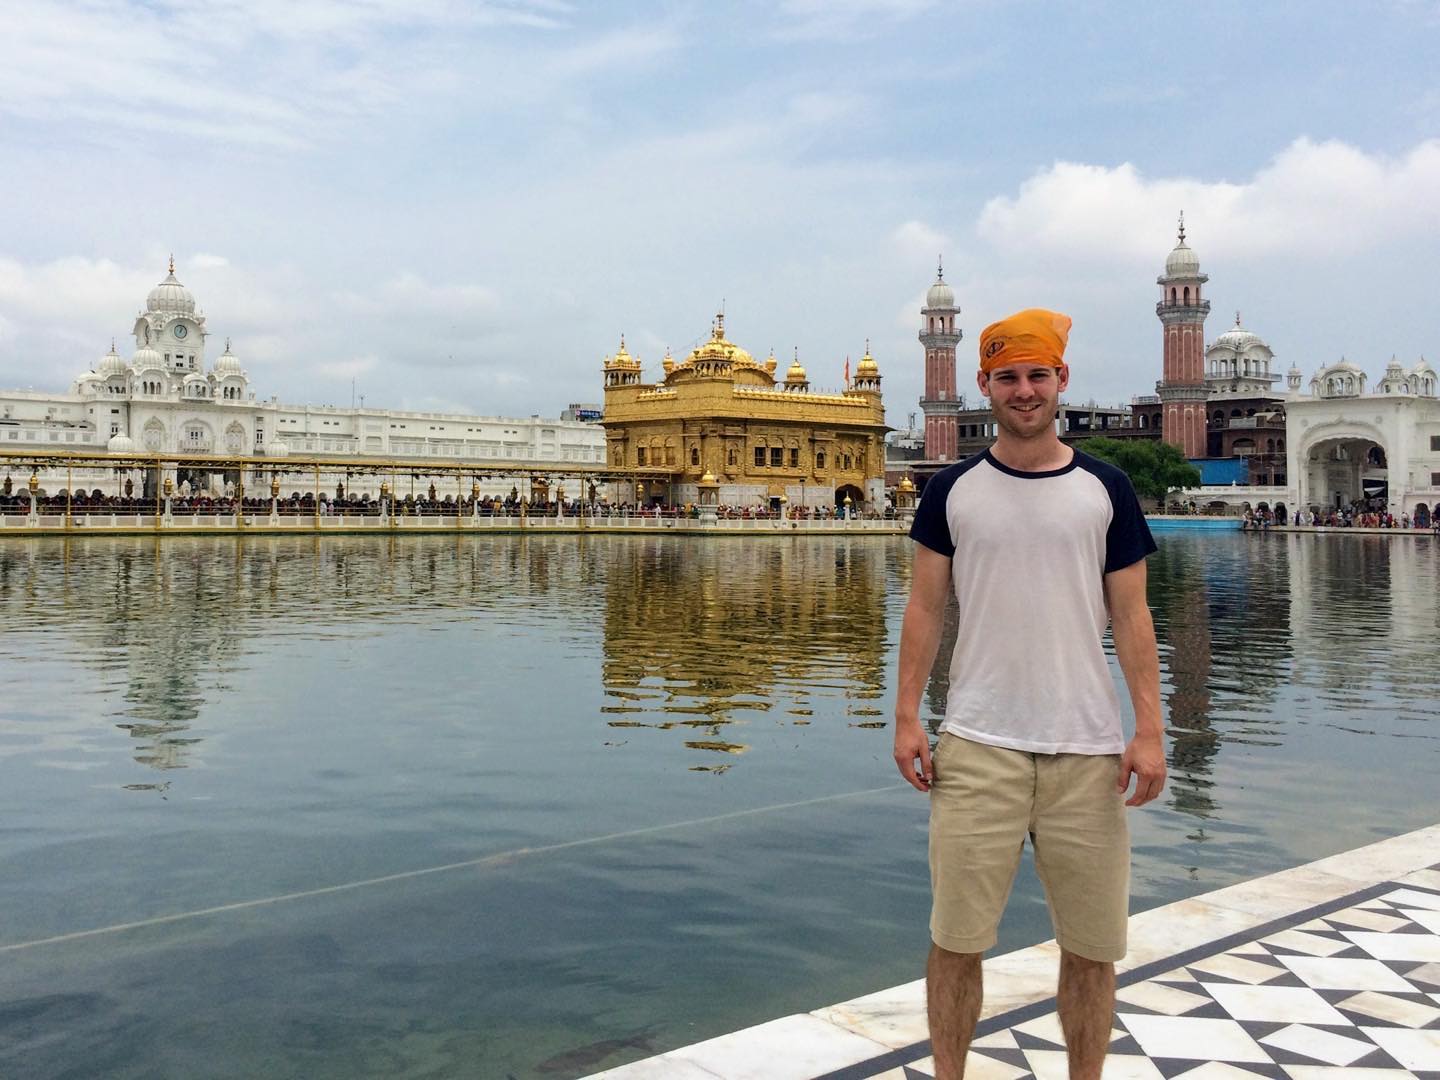 Amritsar, India 🇮🇳.
.
The Golden Temple is the most significant gurdwara in Sikhism. A beautiful place of tranquility and spirituality making it one of my favourite places in India. 
.
#travel #india #backpacker #traveller #amritsar #travelgram #goldentemple #instatravel #punjab #explore #backpacking #asia #indian #traveling #goldentempleamritsar #sikh #traveltheworld #indiatravelgram #indiatravel #sikhism #holy #amritsar #traveladdict #danroundtheworld